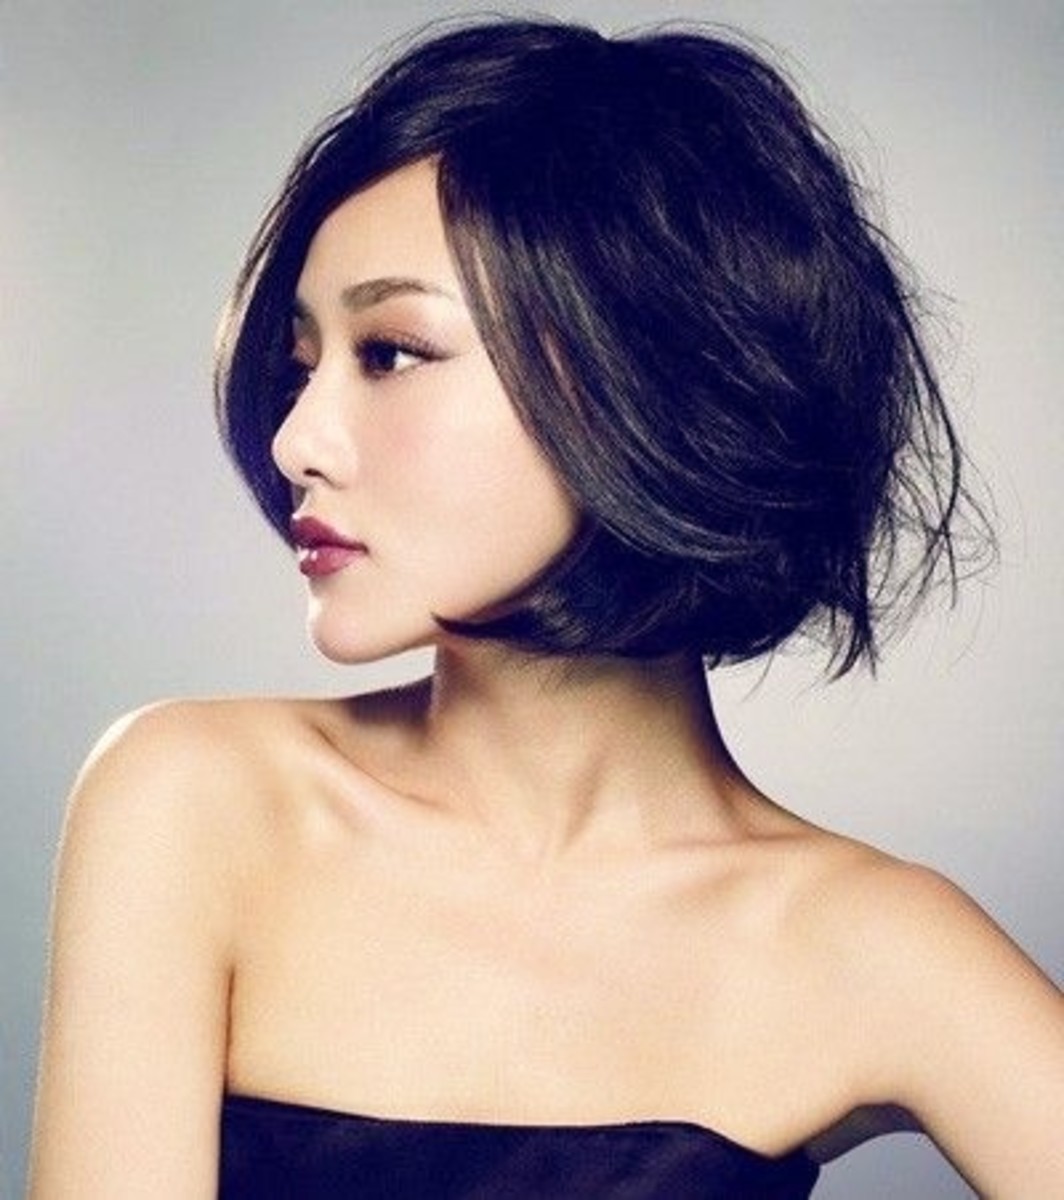 The 10 Best Summer Hairstyles for Asian Women - HubPages